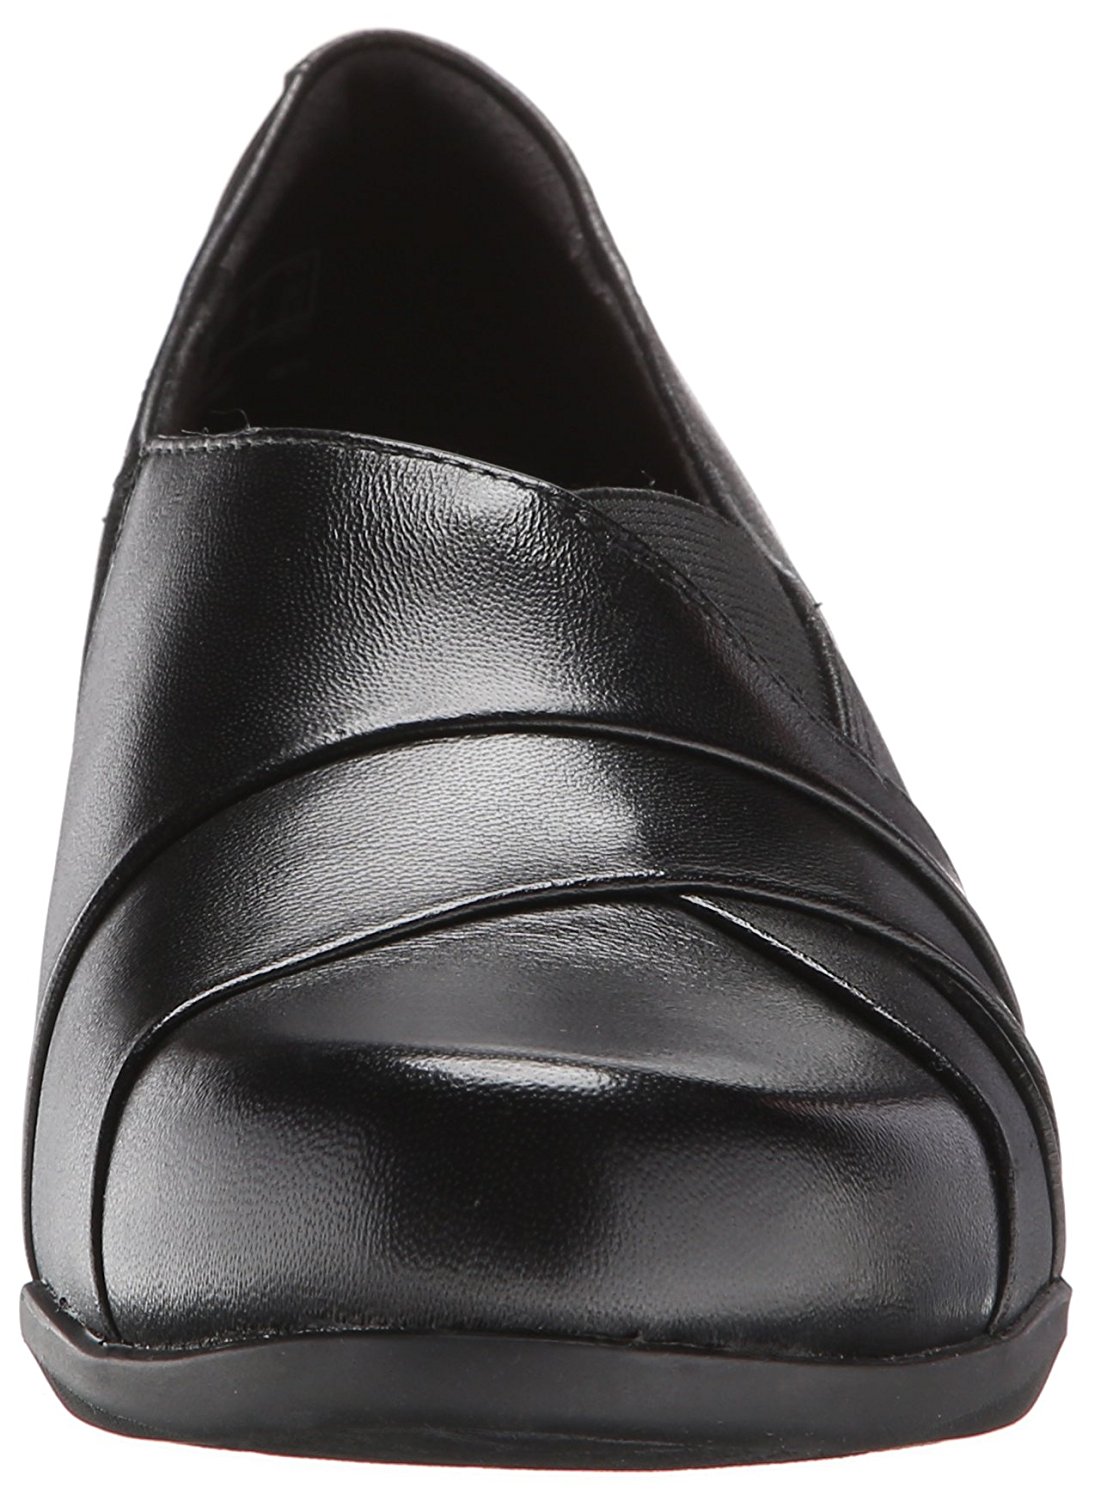 CLARKS Womens Rosalyn Adele Leather Closed Toe Classic, Black Leather ...